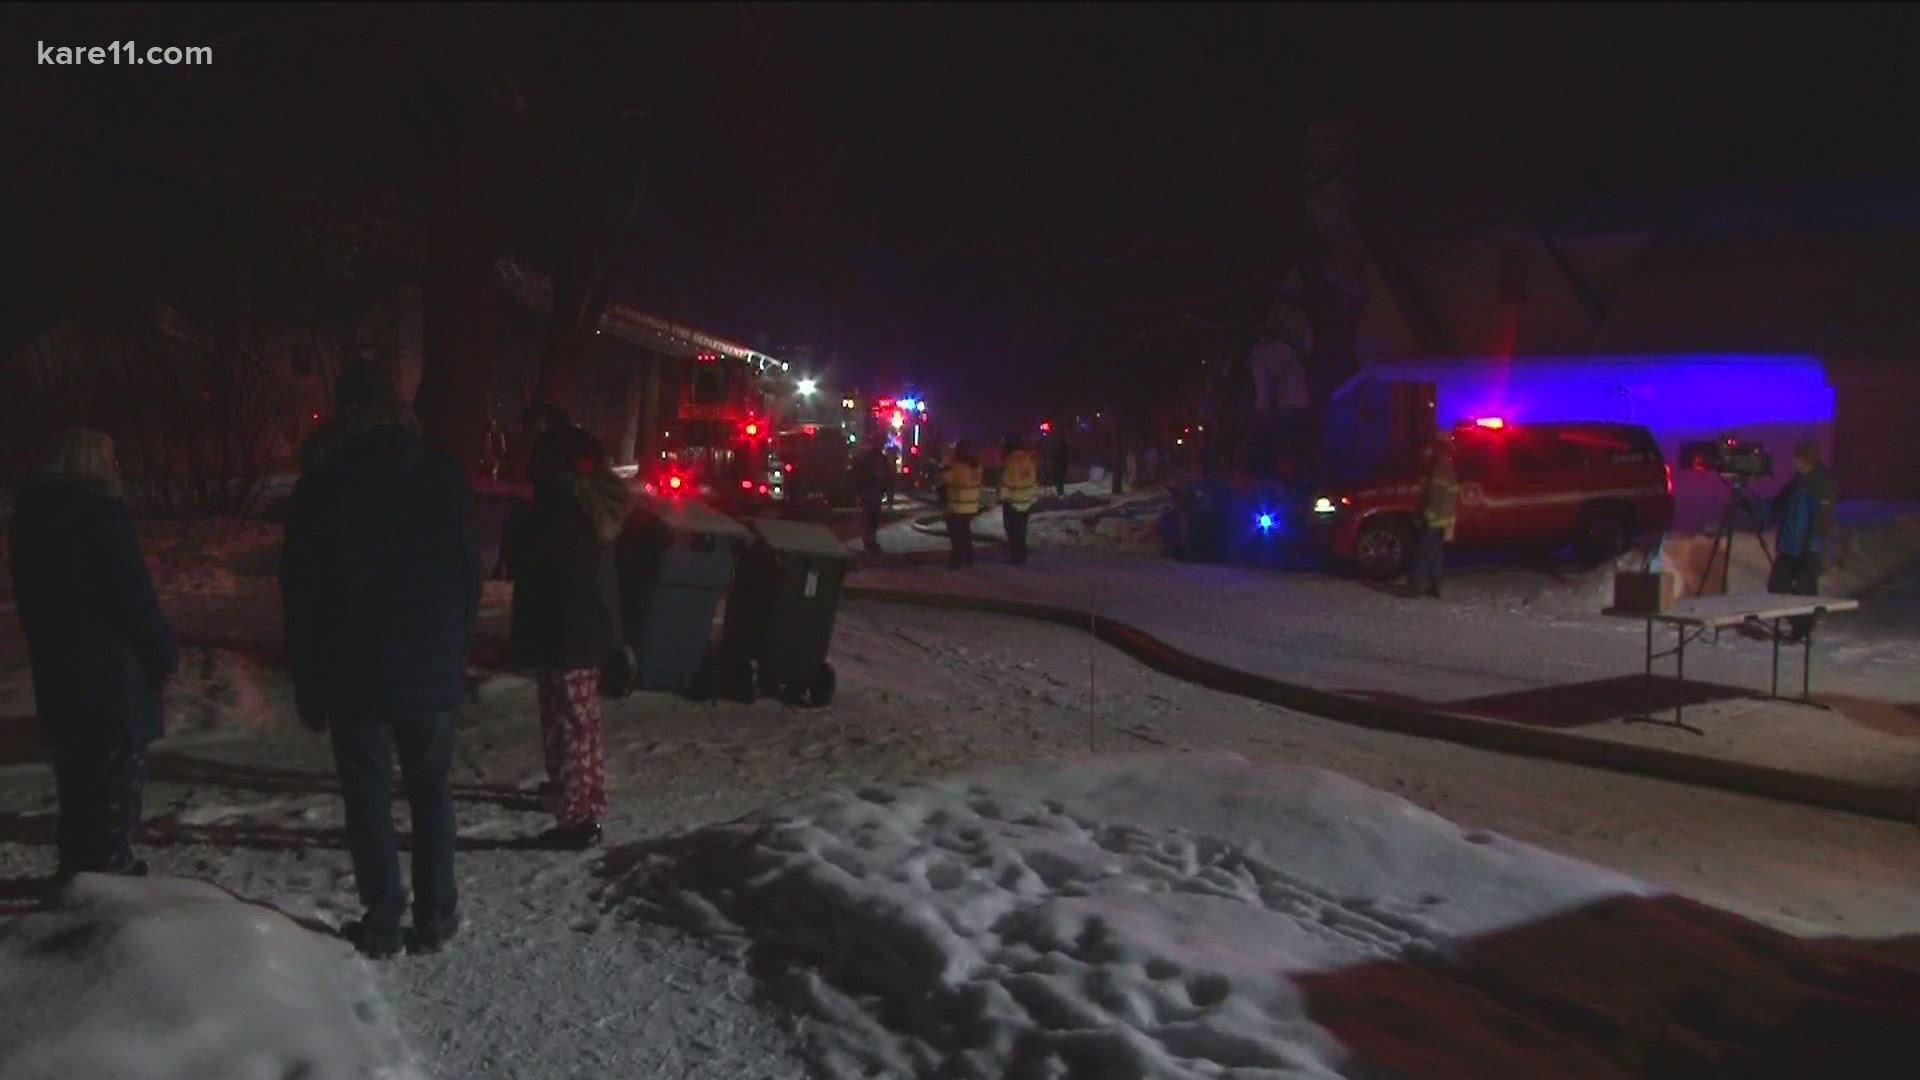 Two people were taken to the hospital after a fire early Monday morning